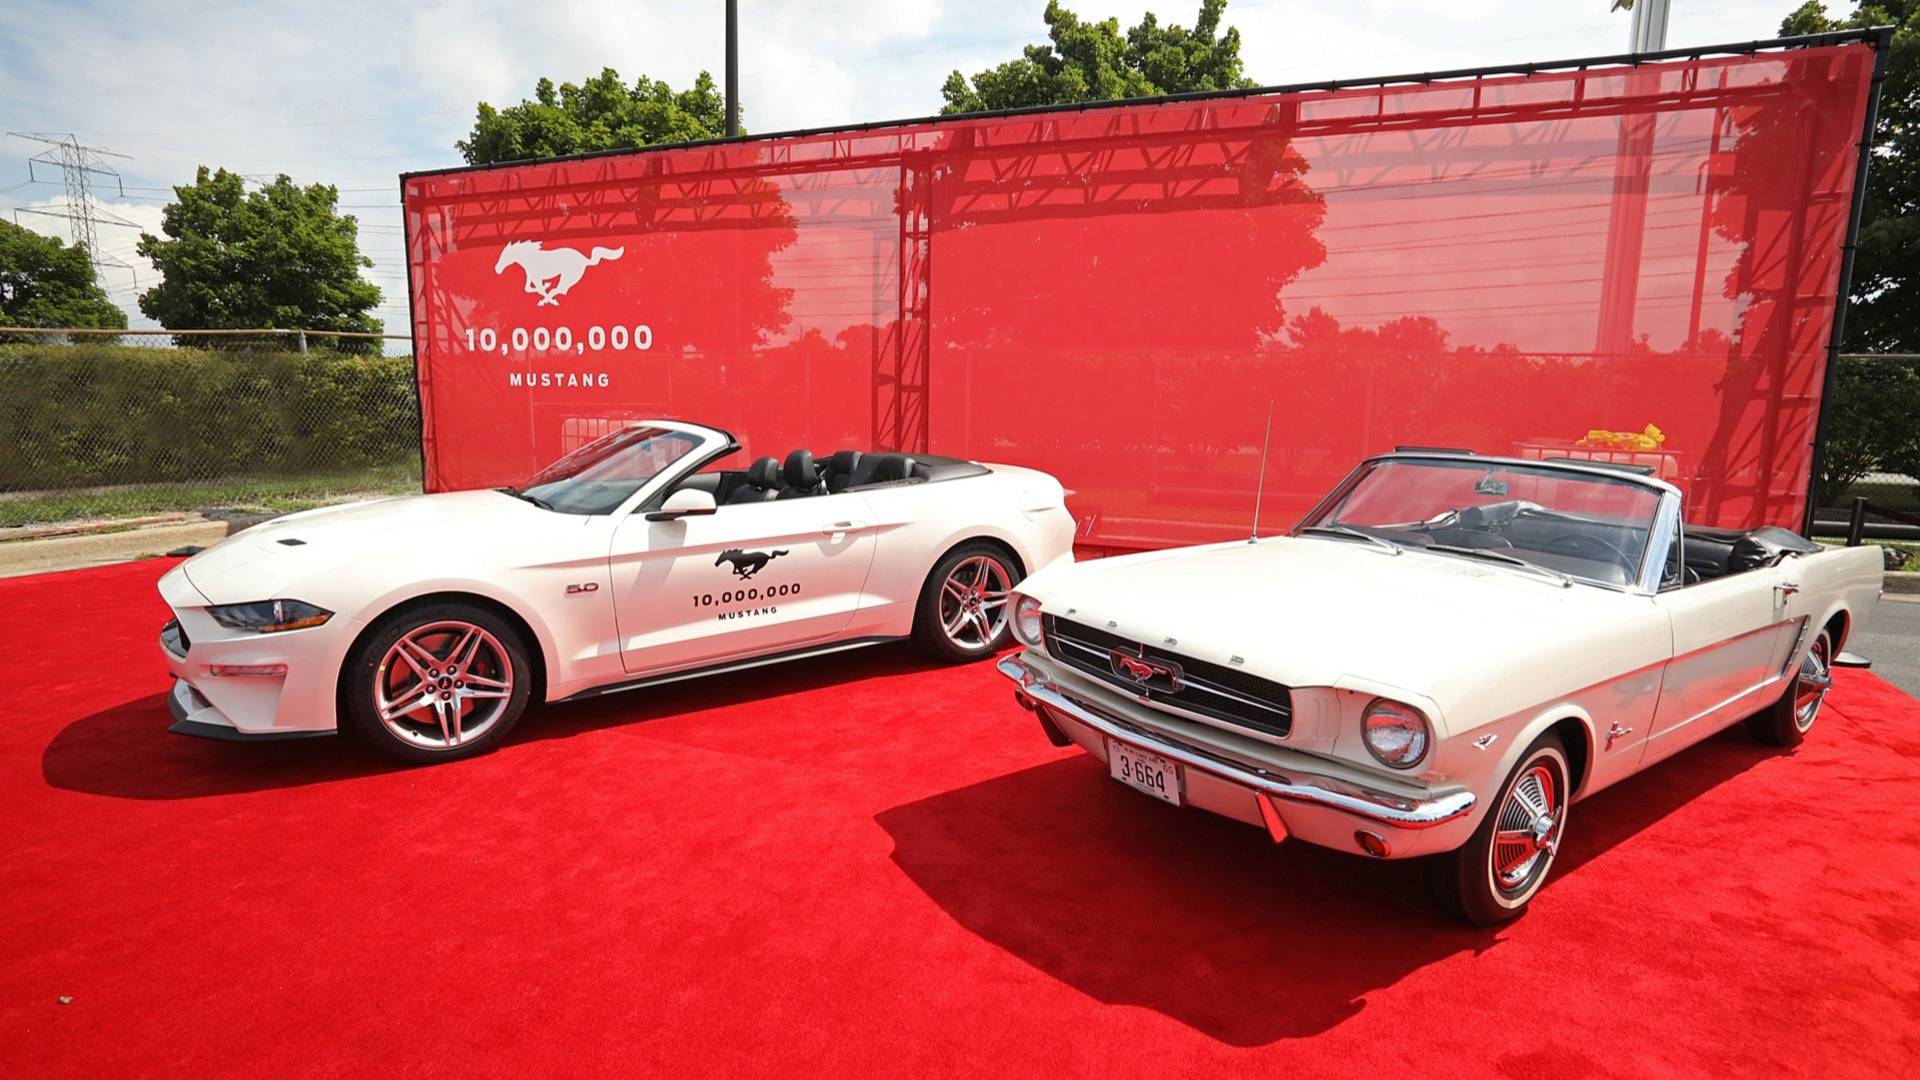 2 mustangs parked on red carpet